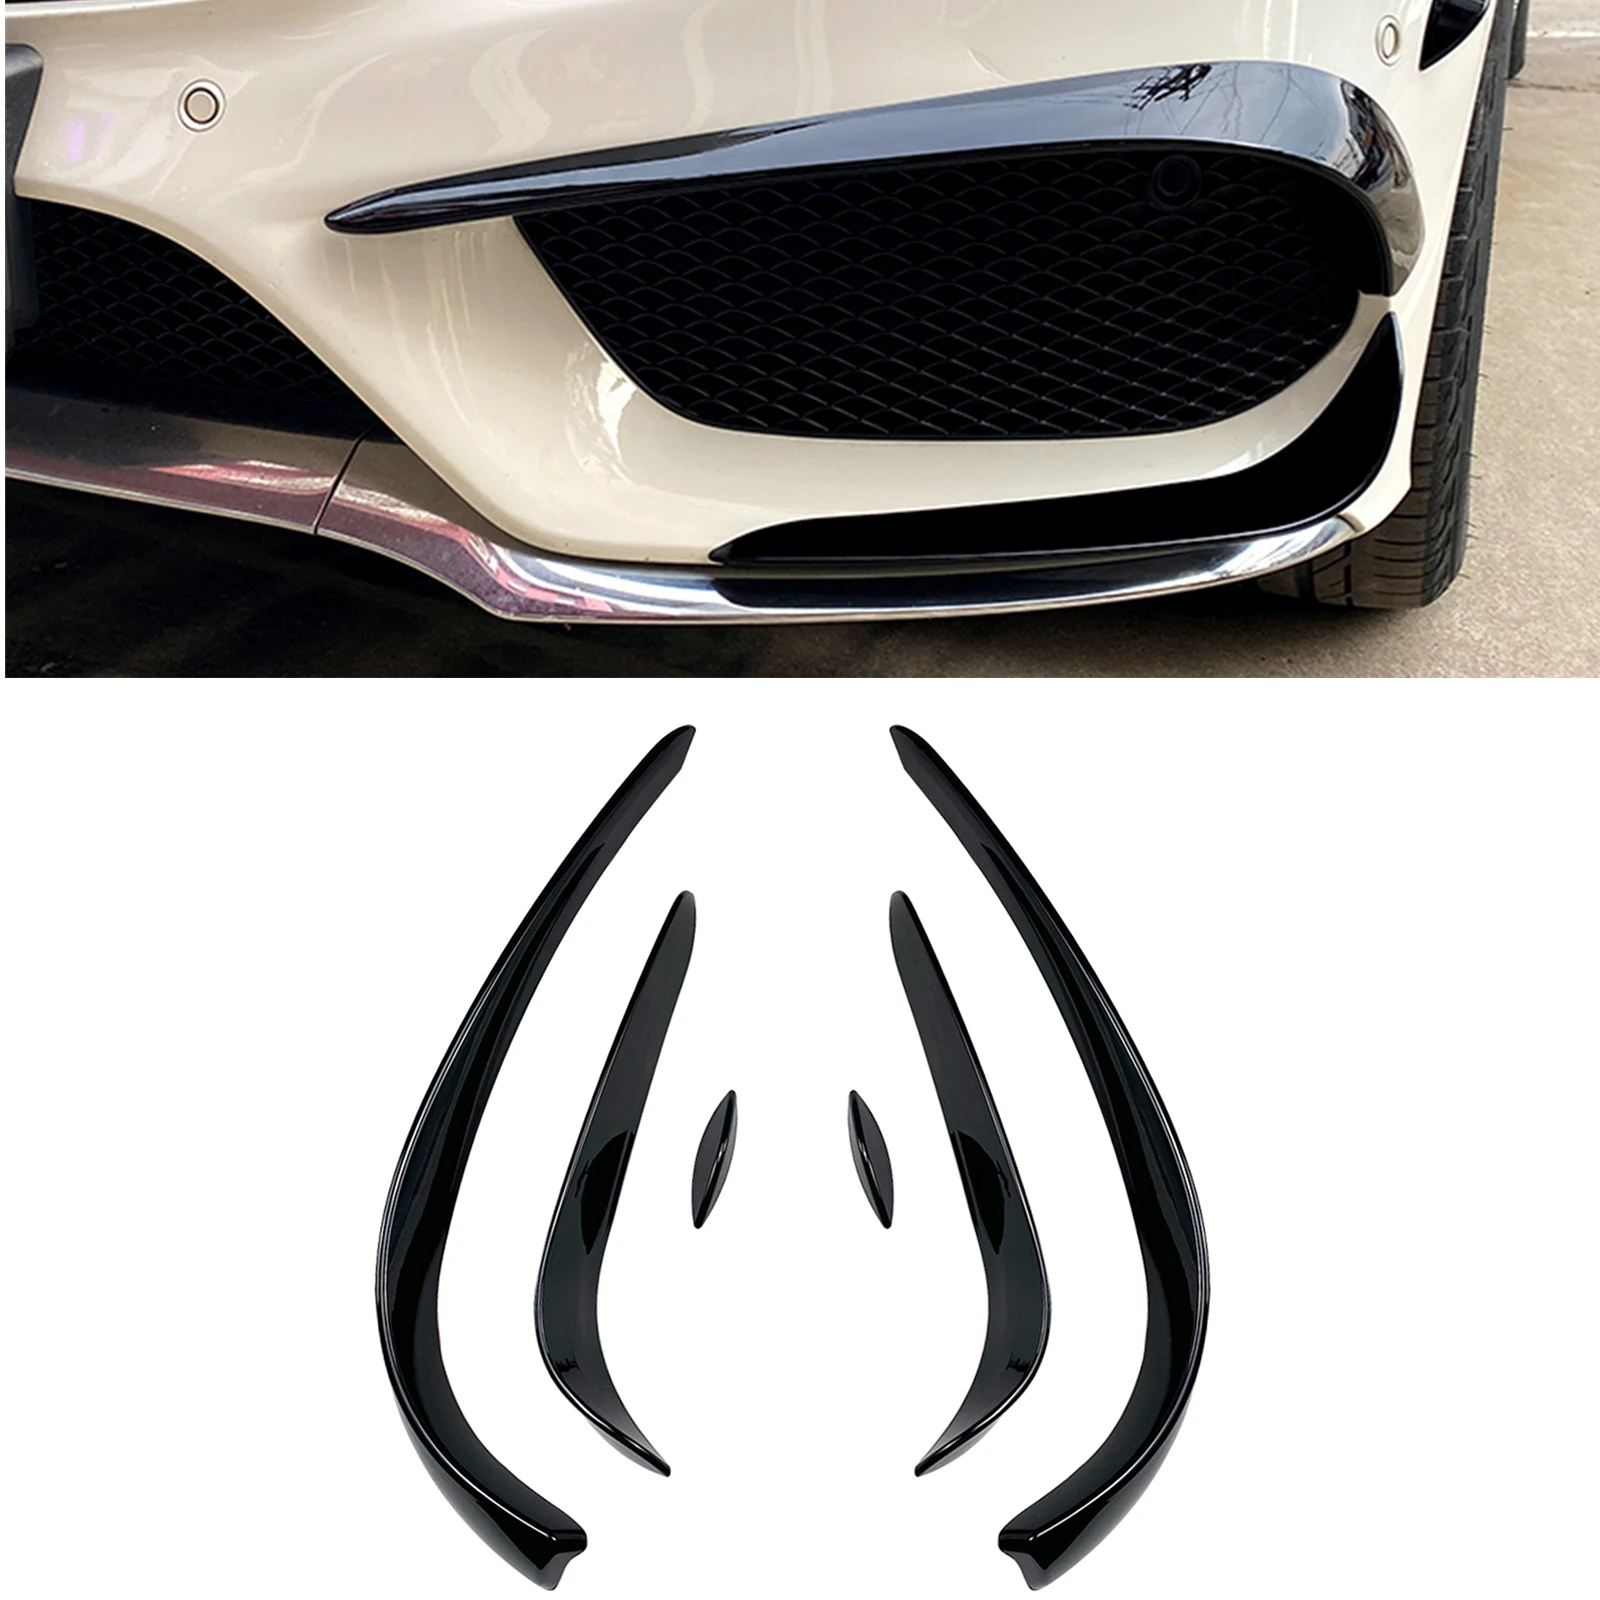 

Front Side Air Vent Cover Trim For Mercedes Benz C Class W205 2015-2018 C180 C200 C260 C43 AMG Sport Car Intake Hood Splitter